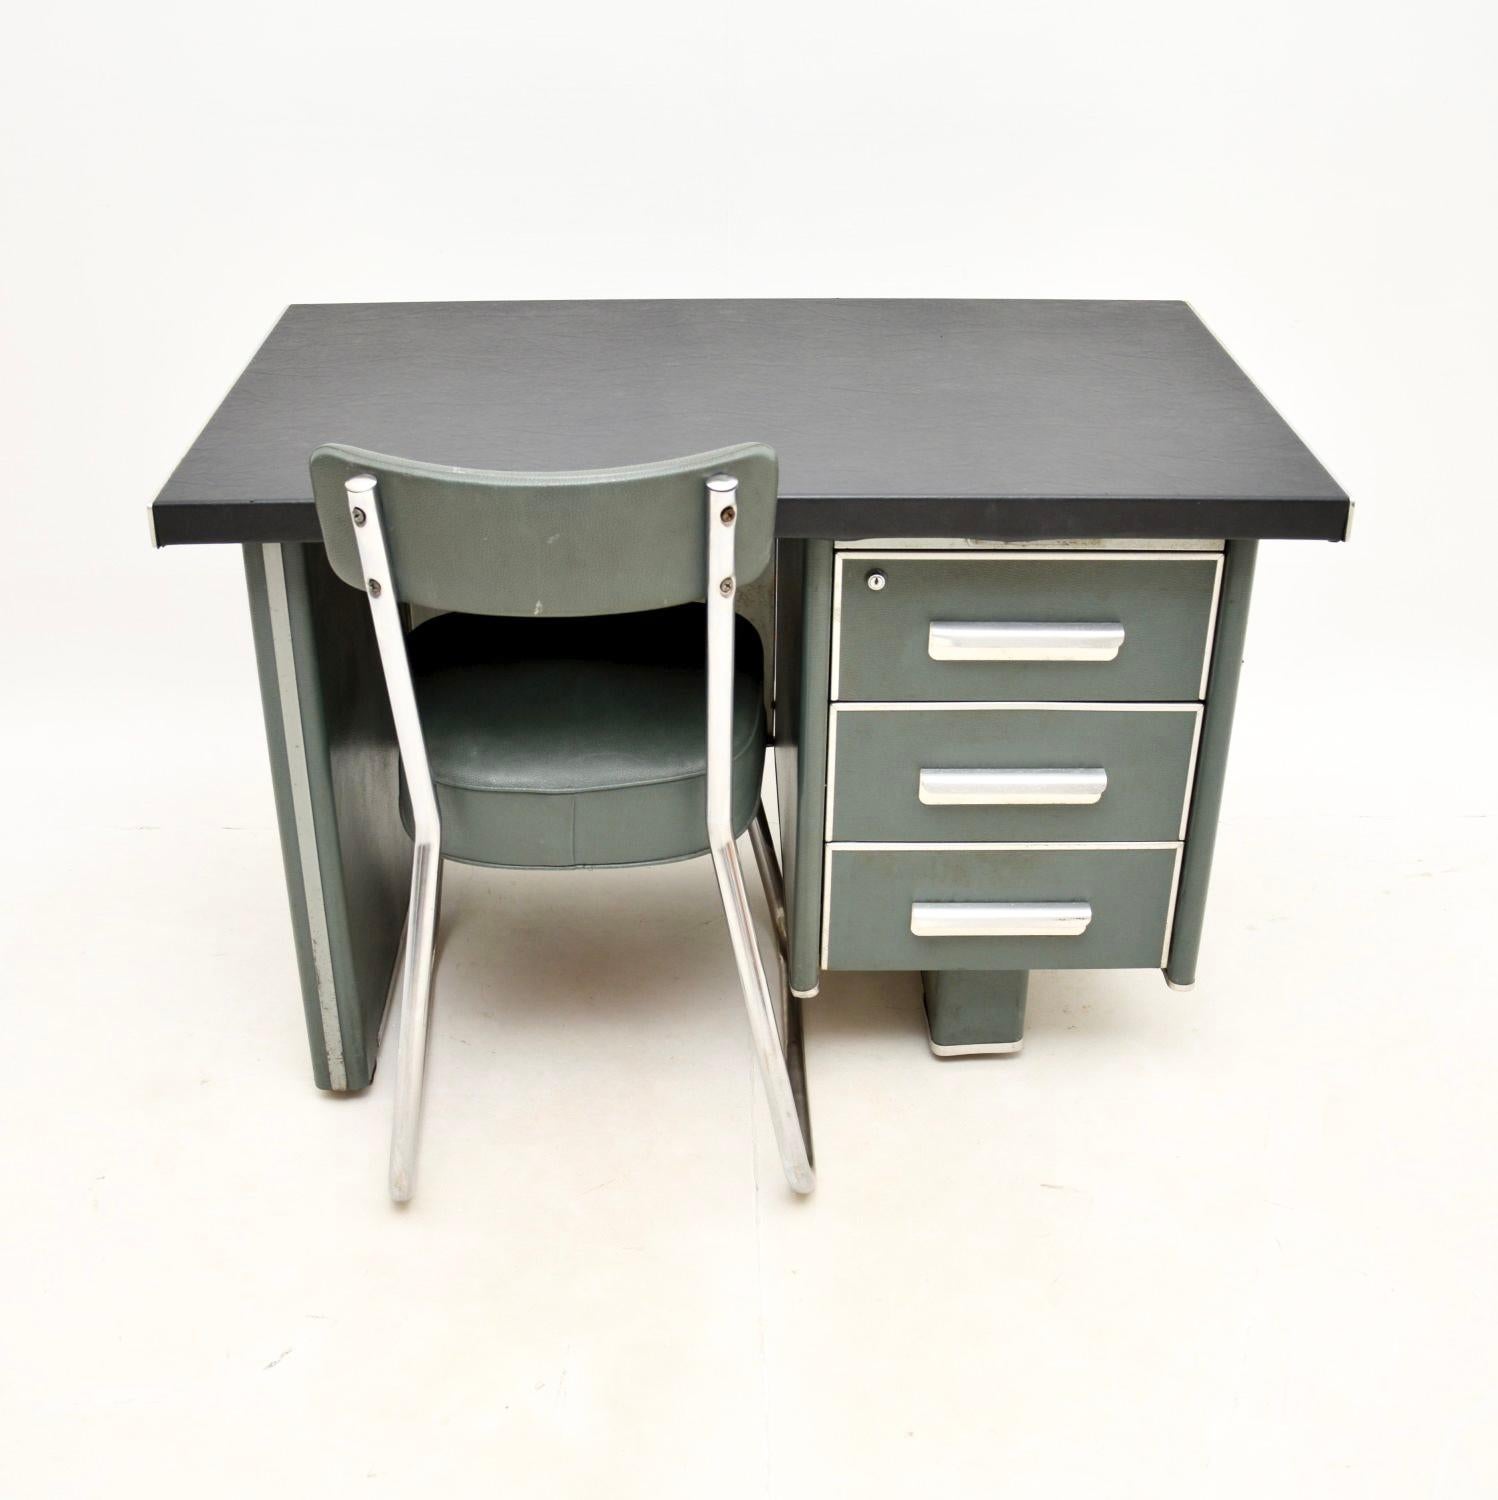 A smart and very well made vintage industrial steel desk and chair, made in the Netherlands and dating from the 1950-60’s.

They are of super quality and are very functional. The desk has a black formica top and the steel frame is clad in a nice